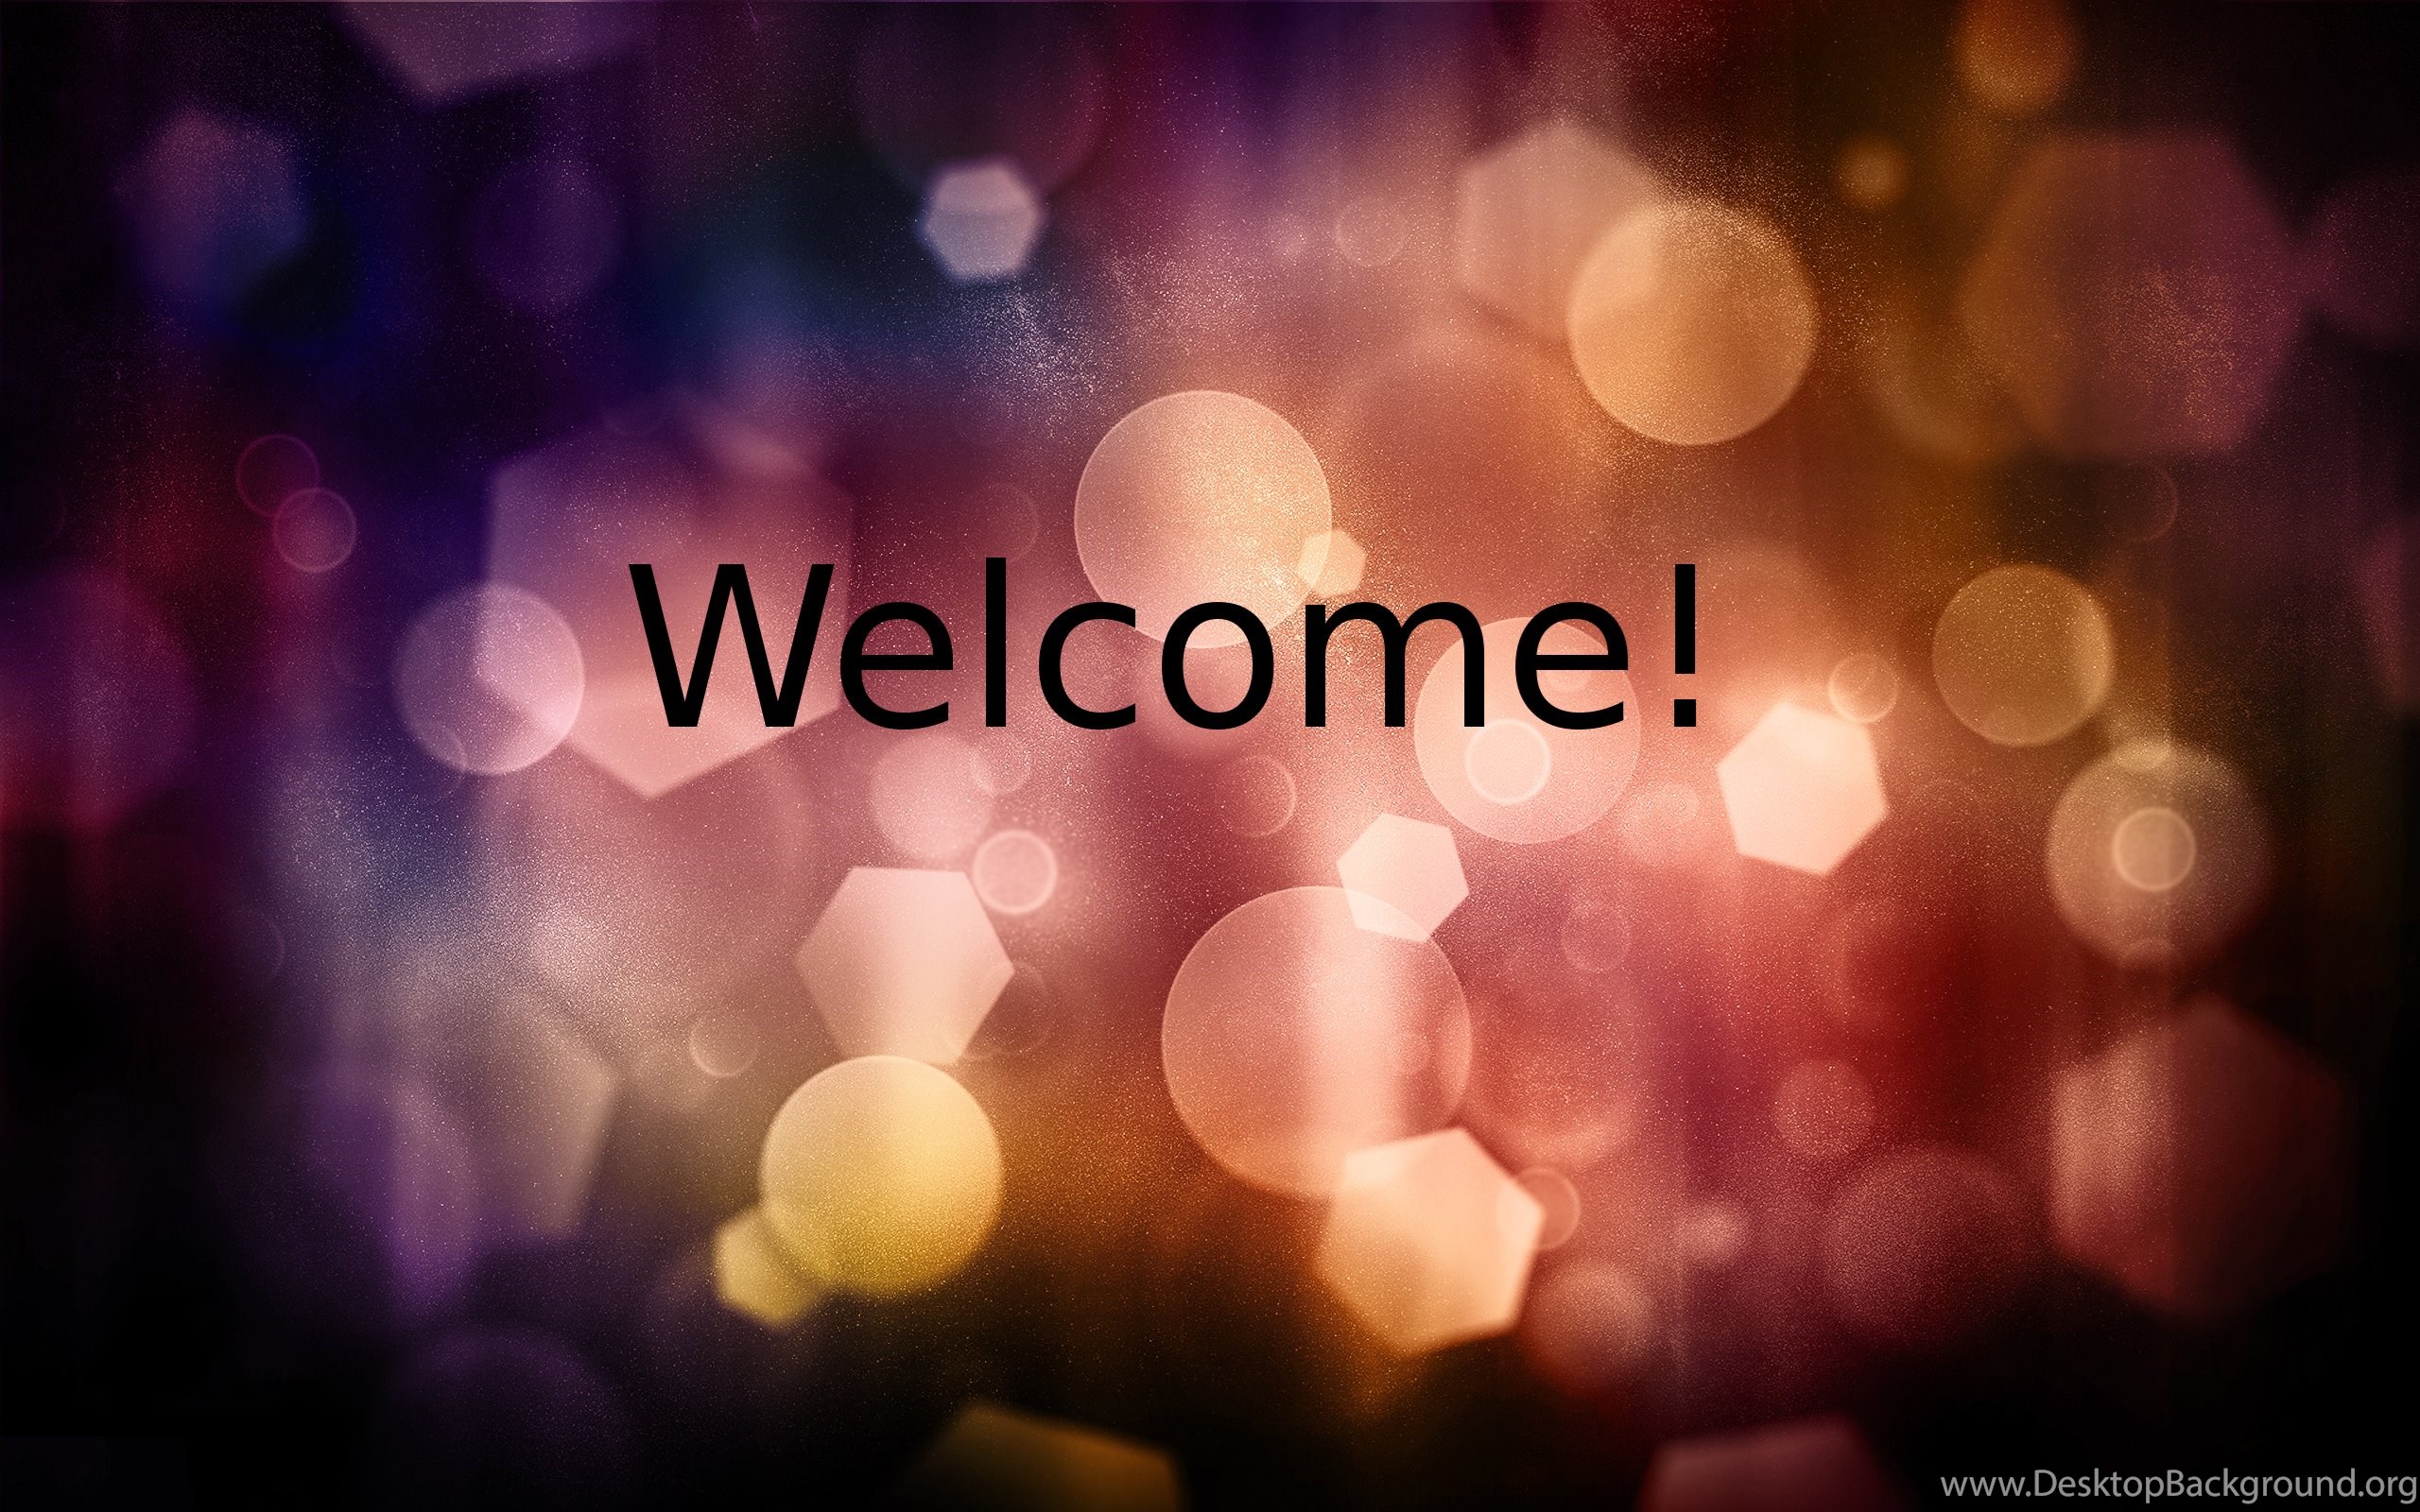 Welcome to live. Картина Welcome. Обои Welcome. Welcome картинка. Надпись Welcome.